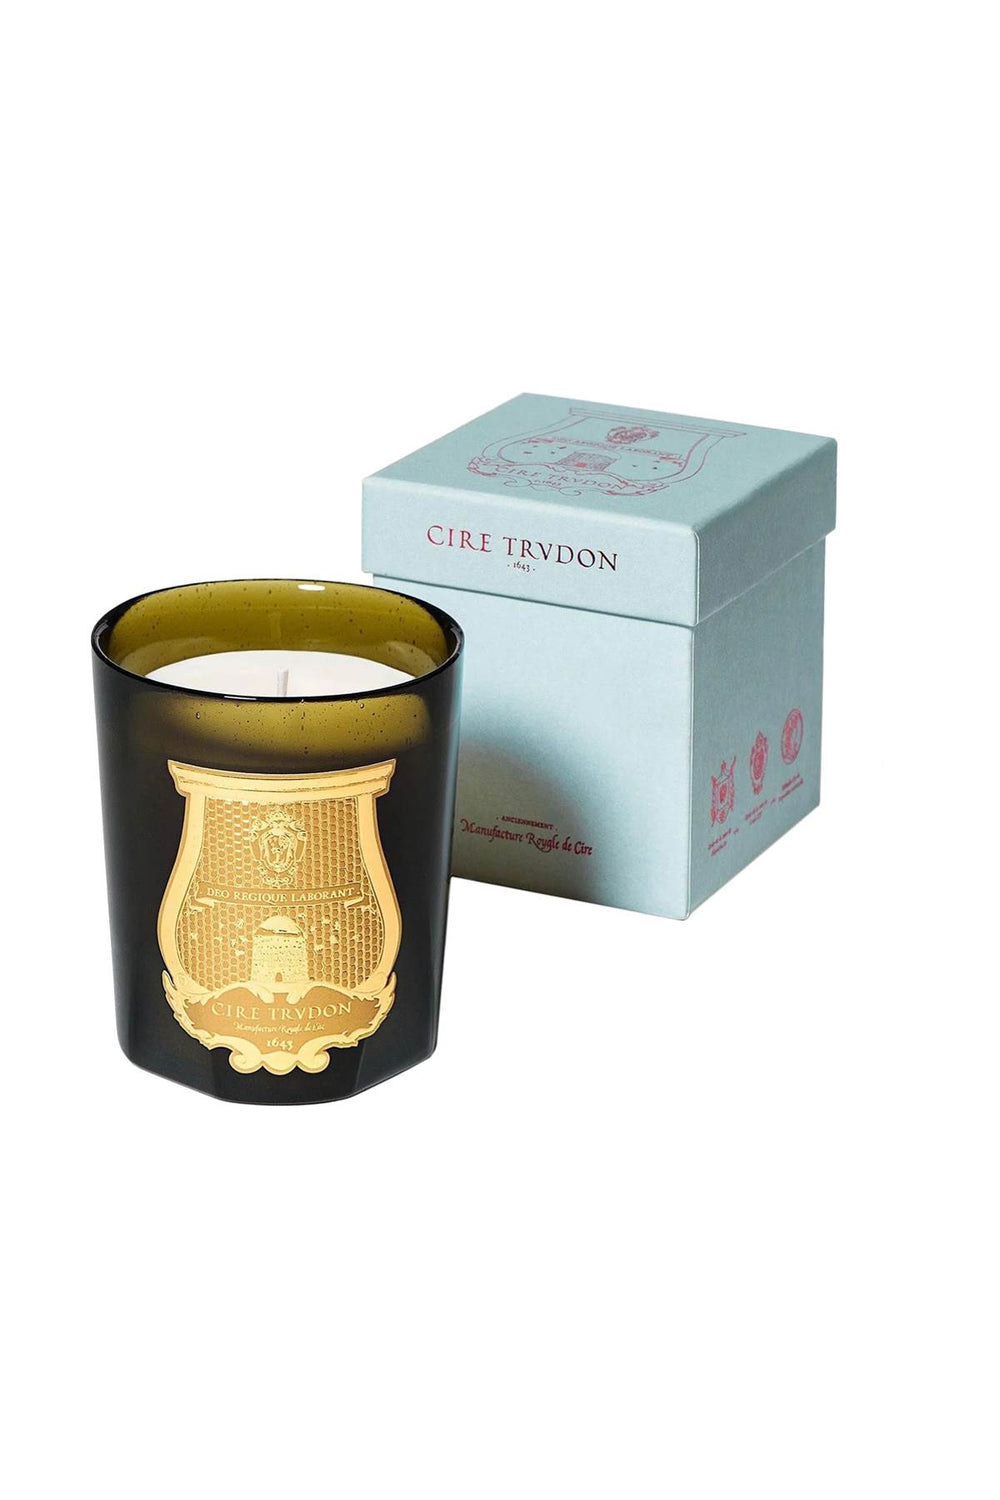 Cire trvdon scented candle solis rex --1